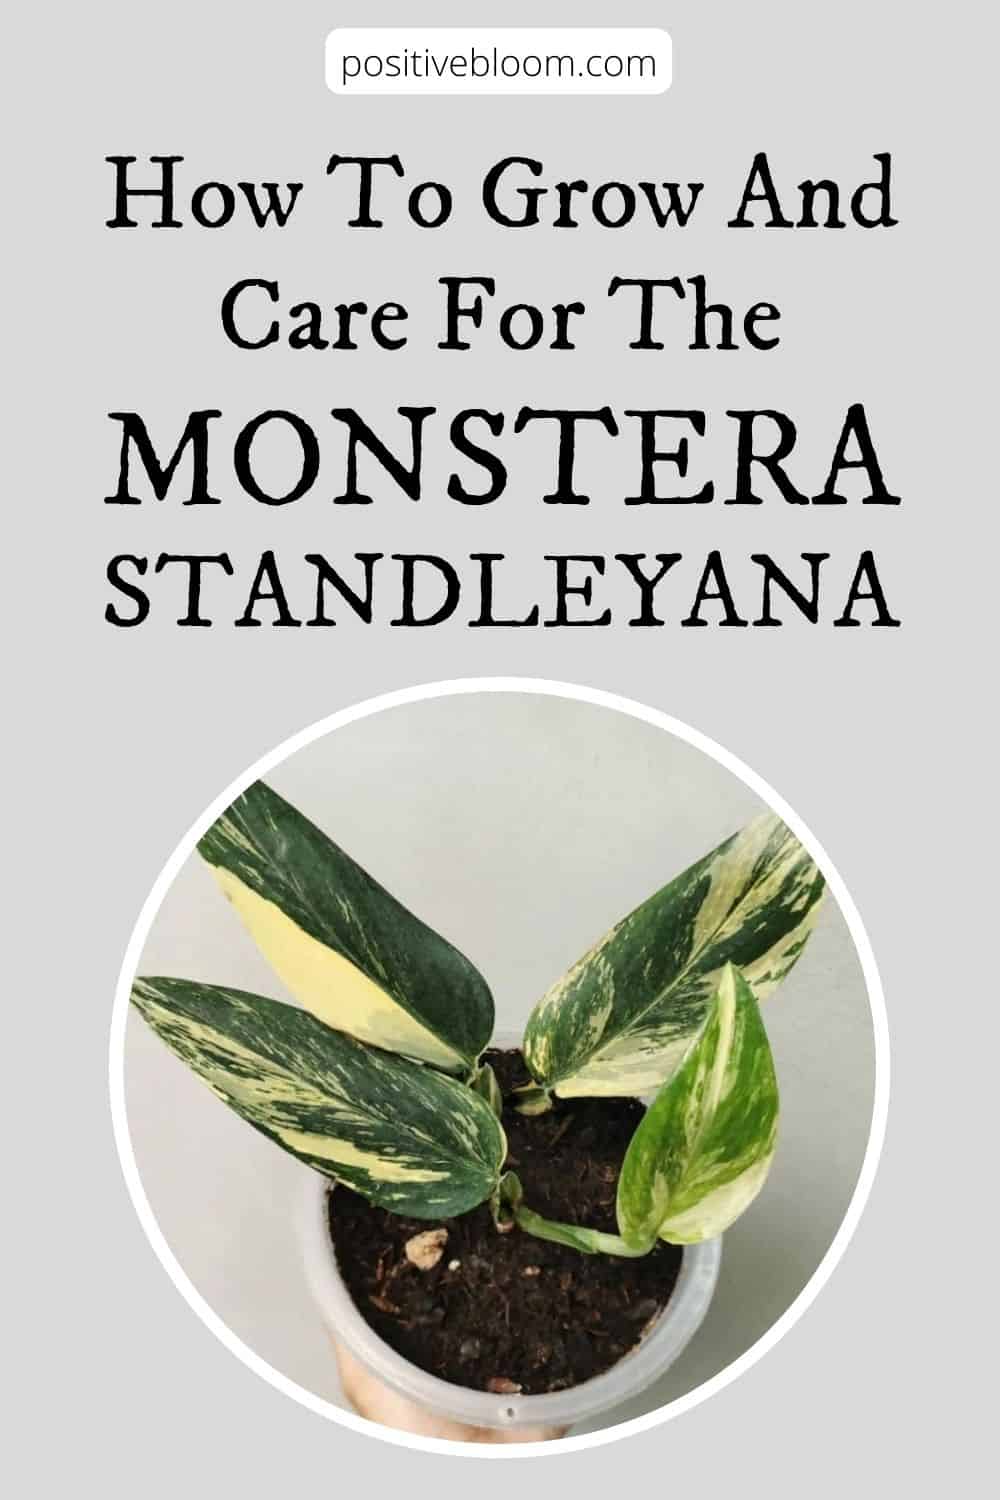 How To Grow And Care For The Monstera Standleyana Pinterest